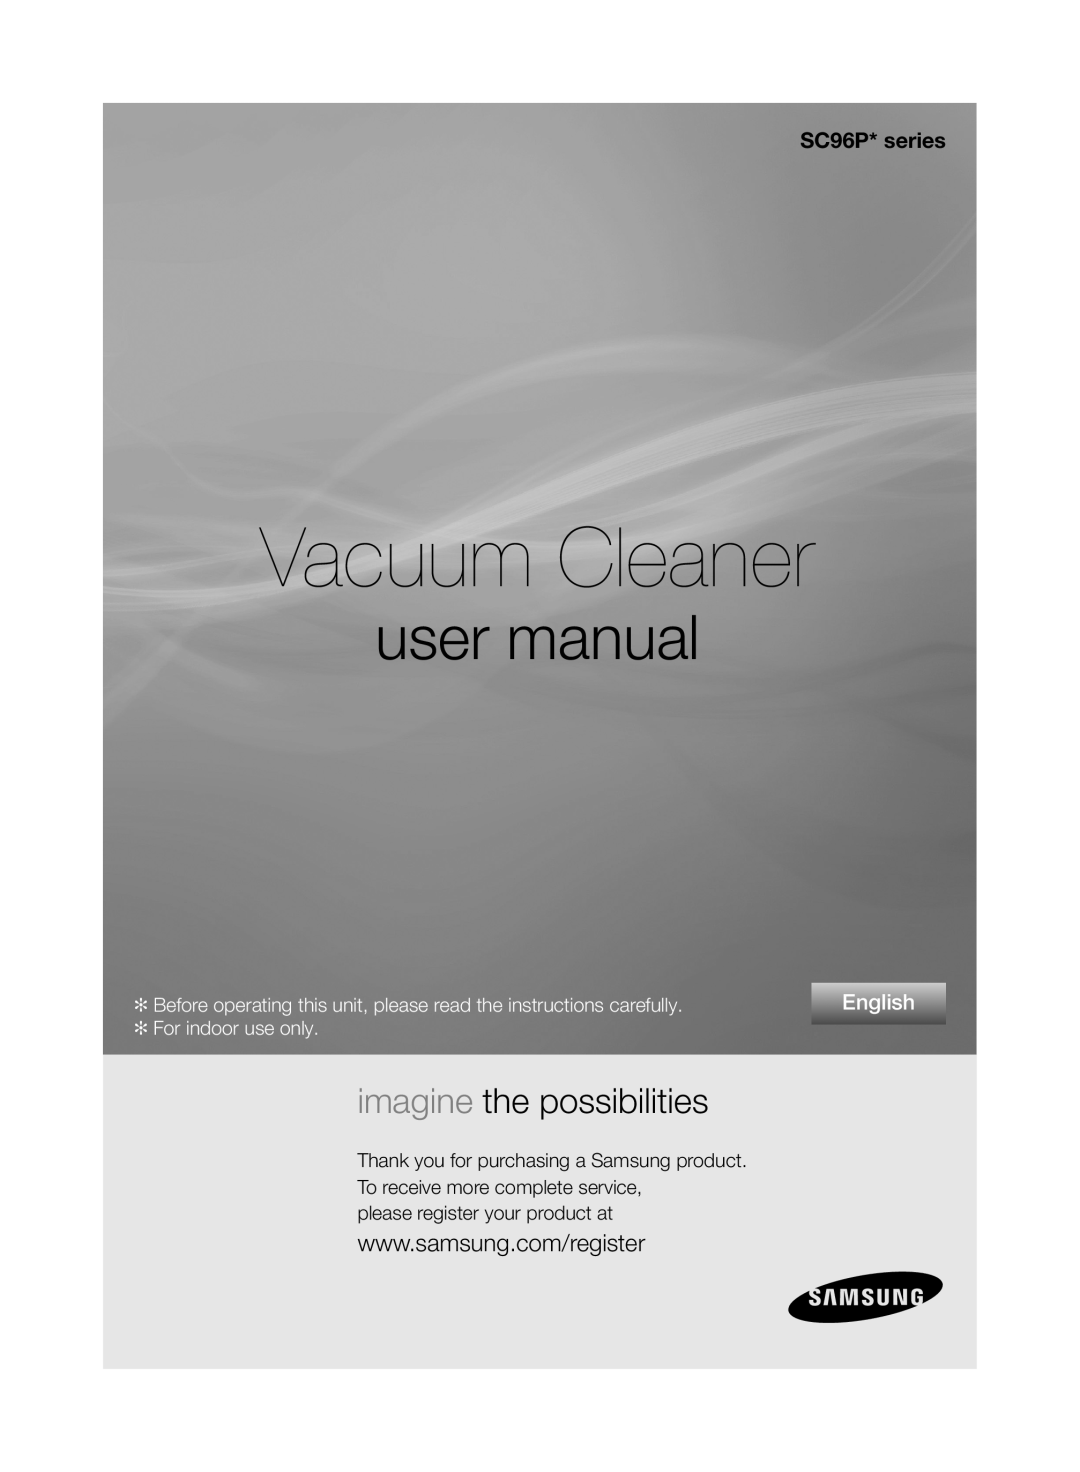 Samsung VCC96P0H1G user manual Vacuum Cleaner, imagine the possibilities, SC96P* series, English, For indoor use only 